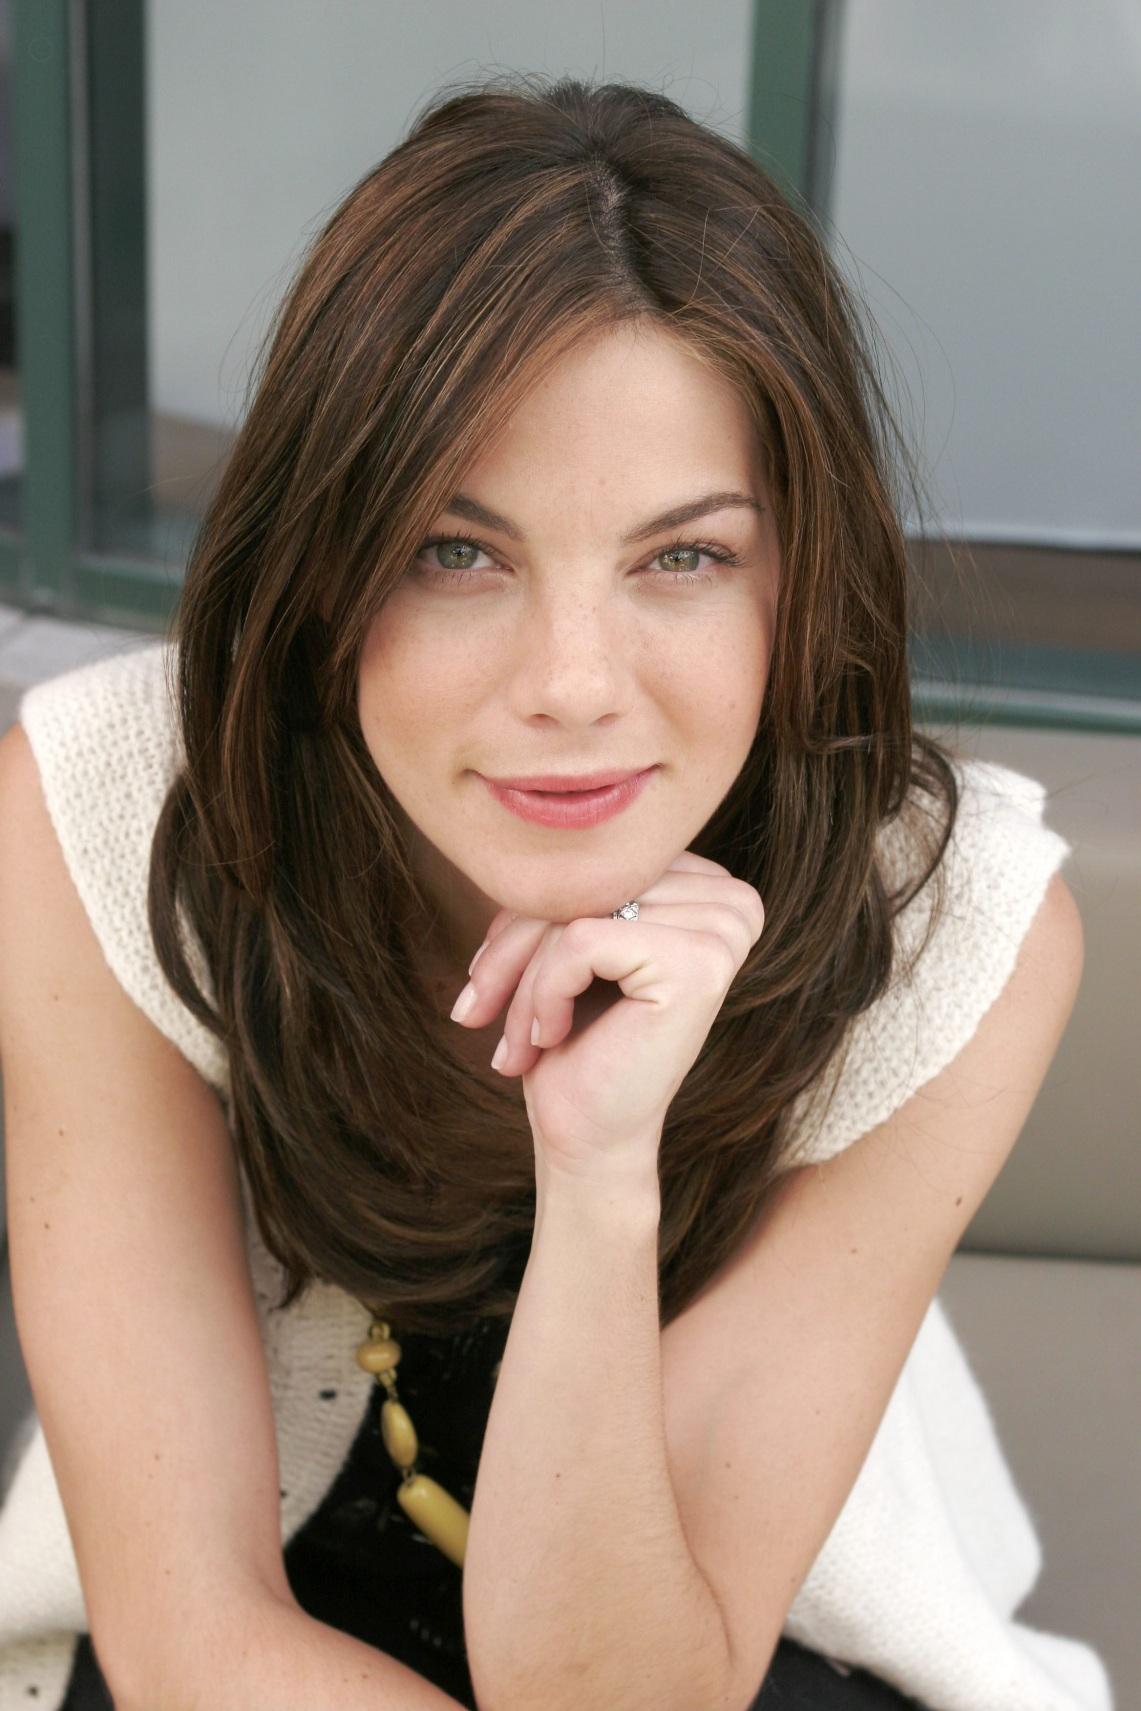 michelle-monaghan-hot-photo-wallpaper-f0496693322e47f2a1334bf7f1675289-large-190496.jpg